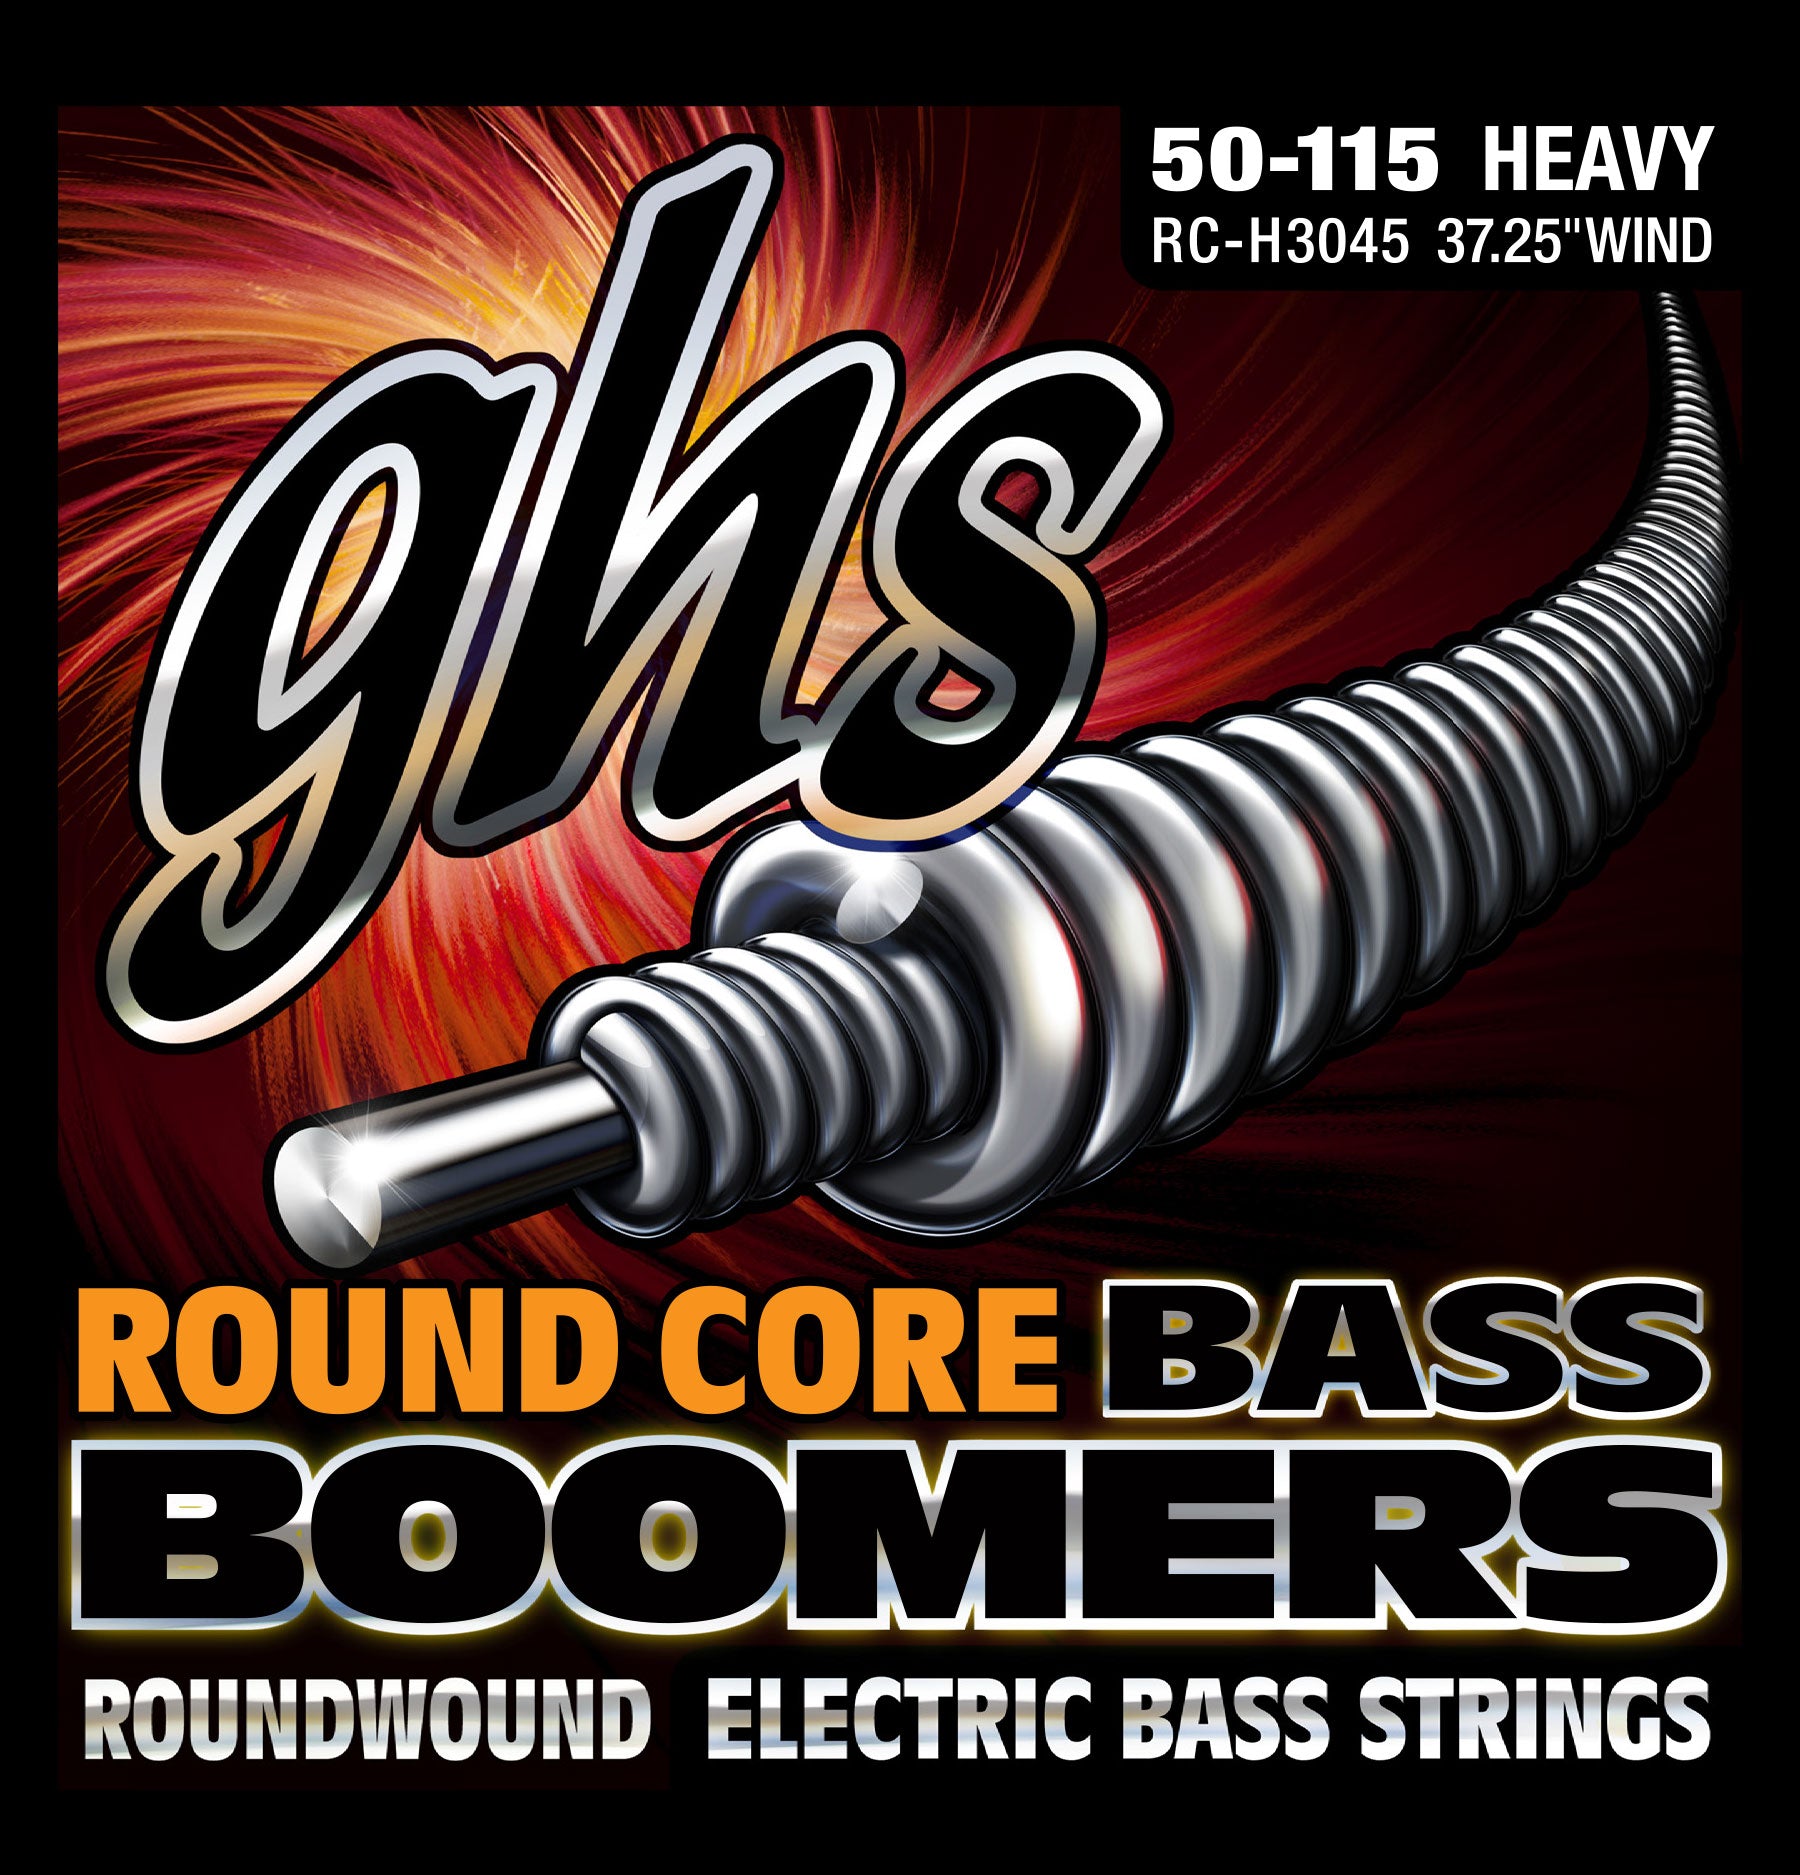 GHS Strings GHS Round Core Bass Boomers Nickel Wound Bass String Set Long Scale - 4-String 50-115 RC-H3045